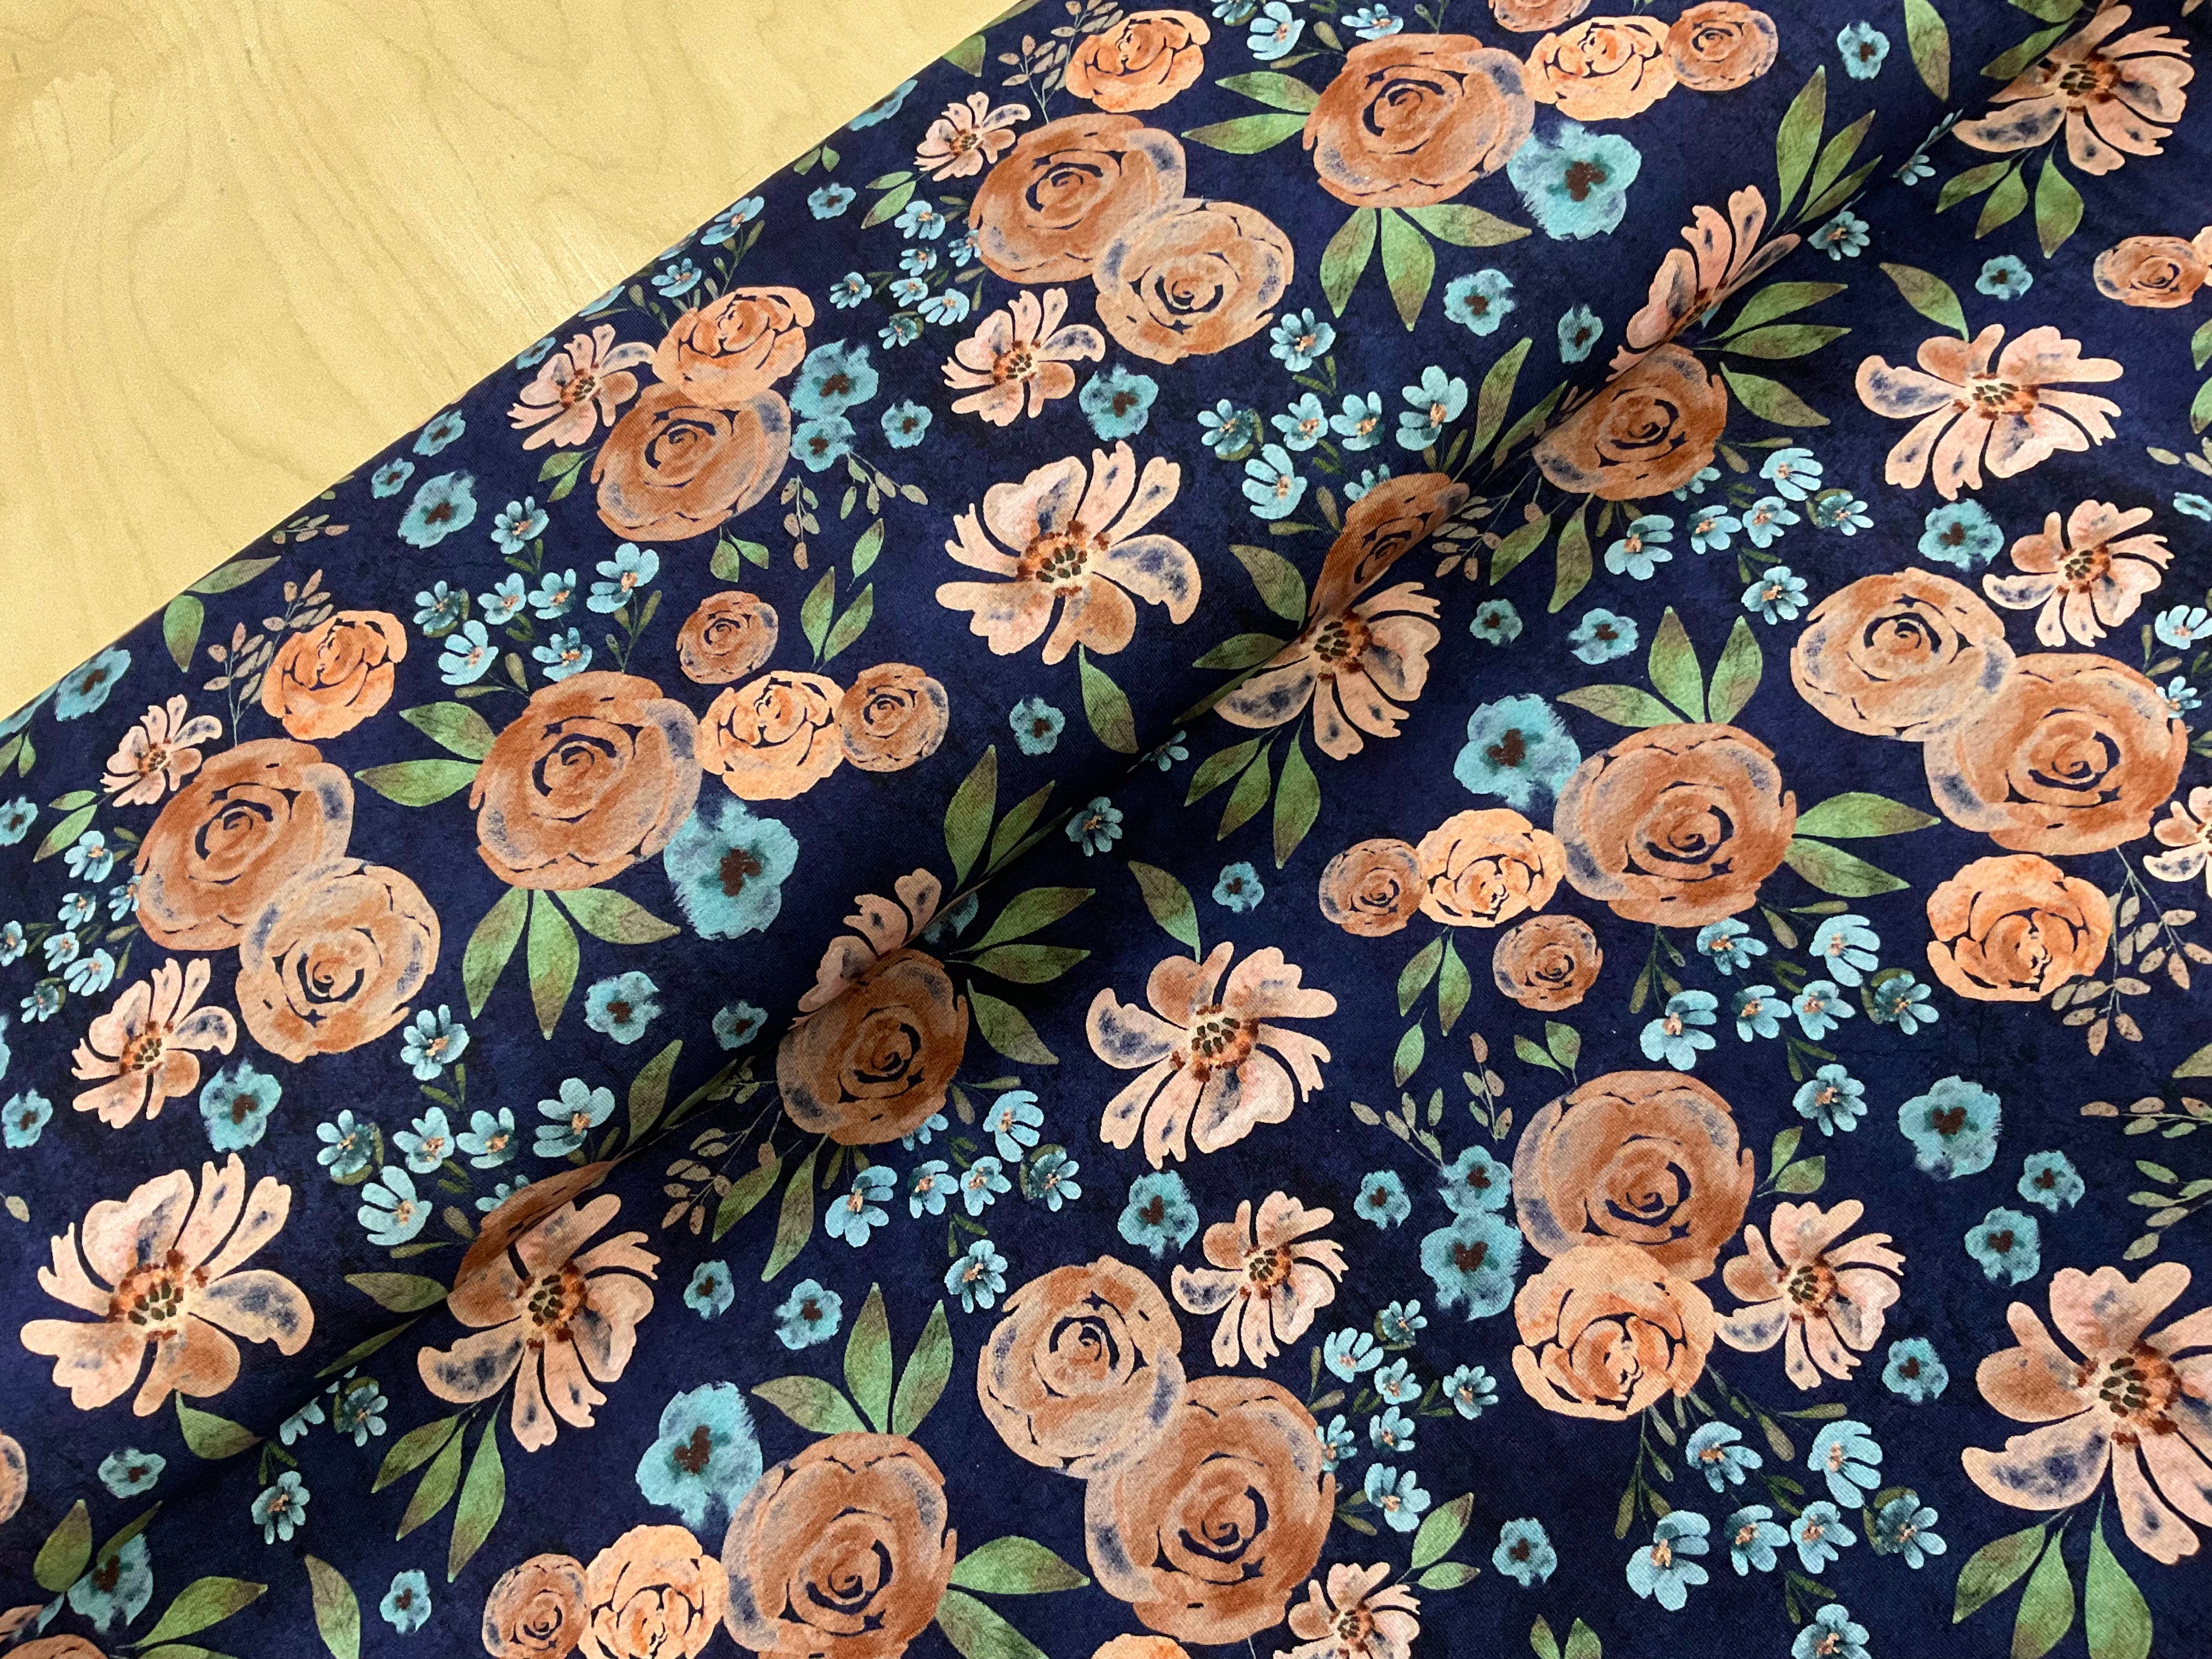 Vintage Floral on Navy Cotton Jersey